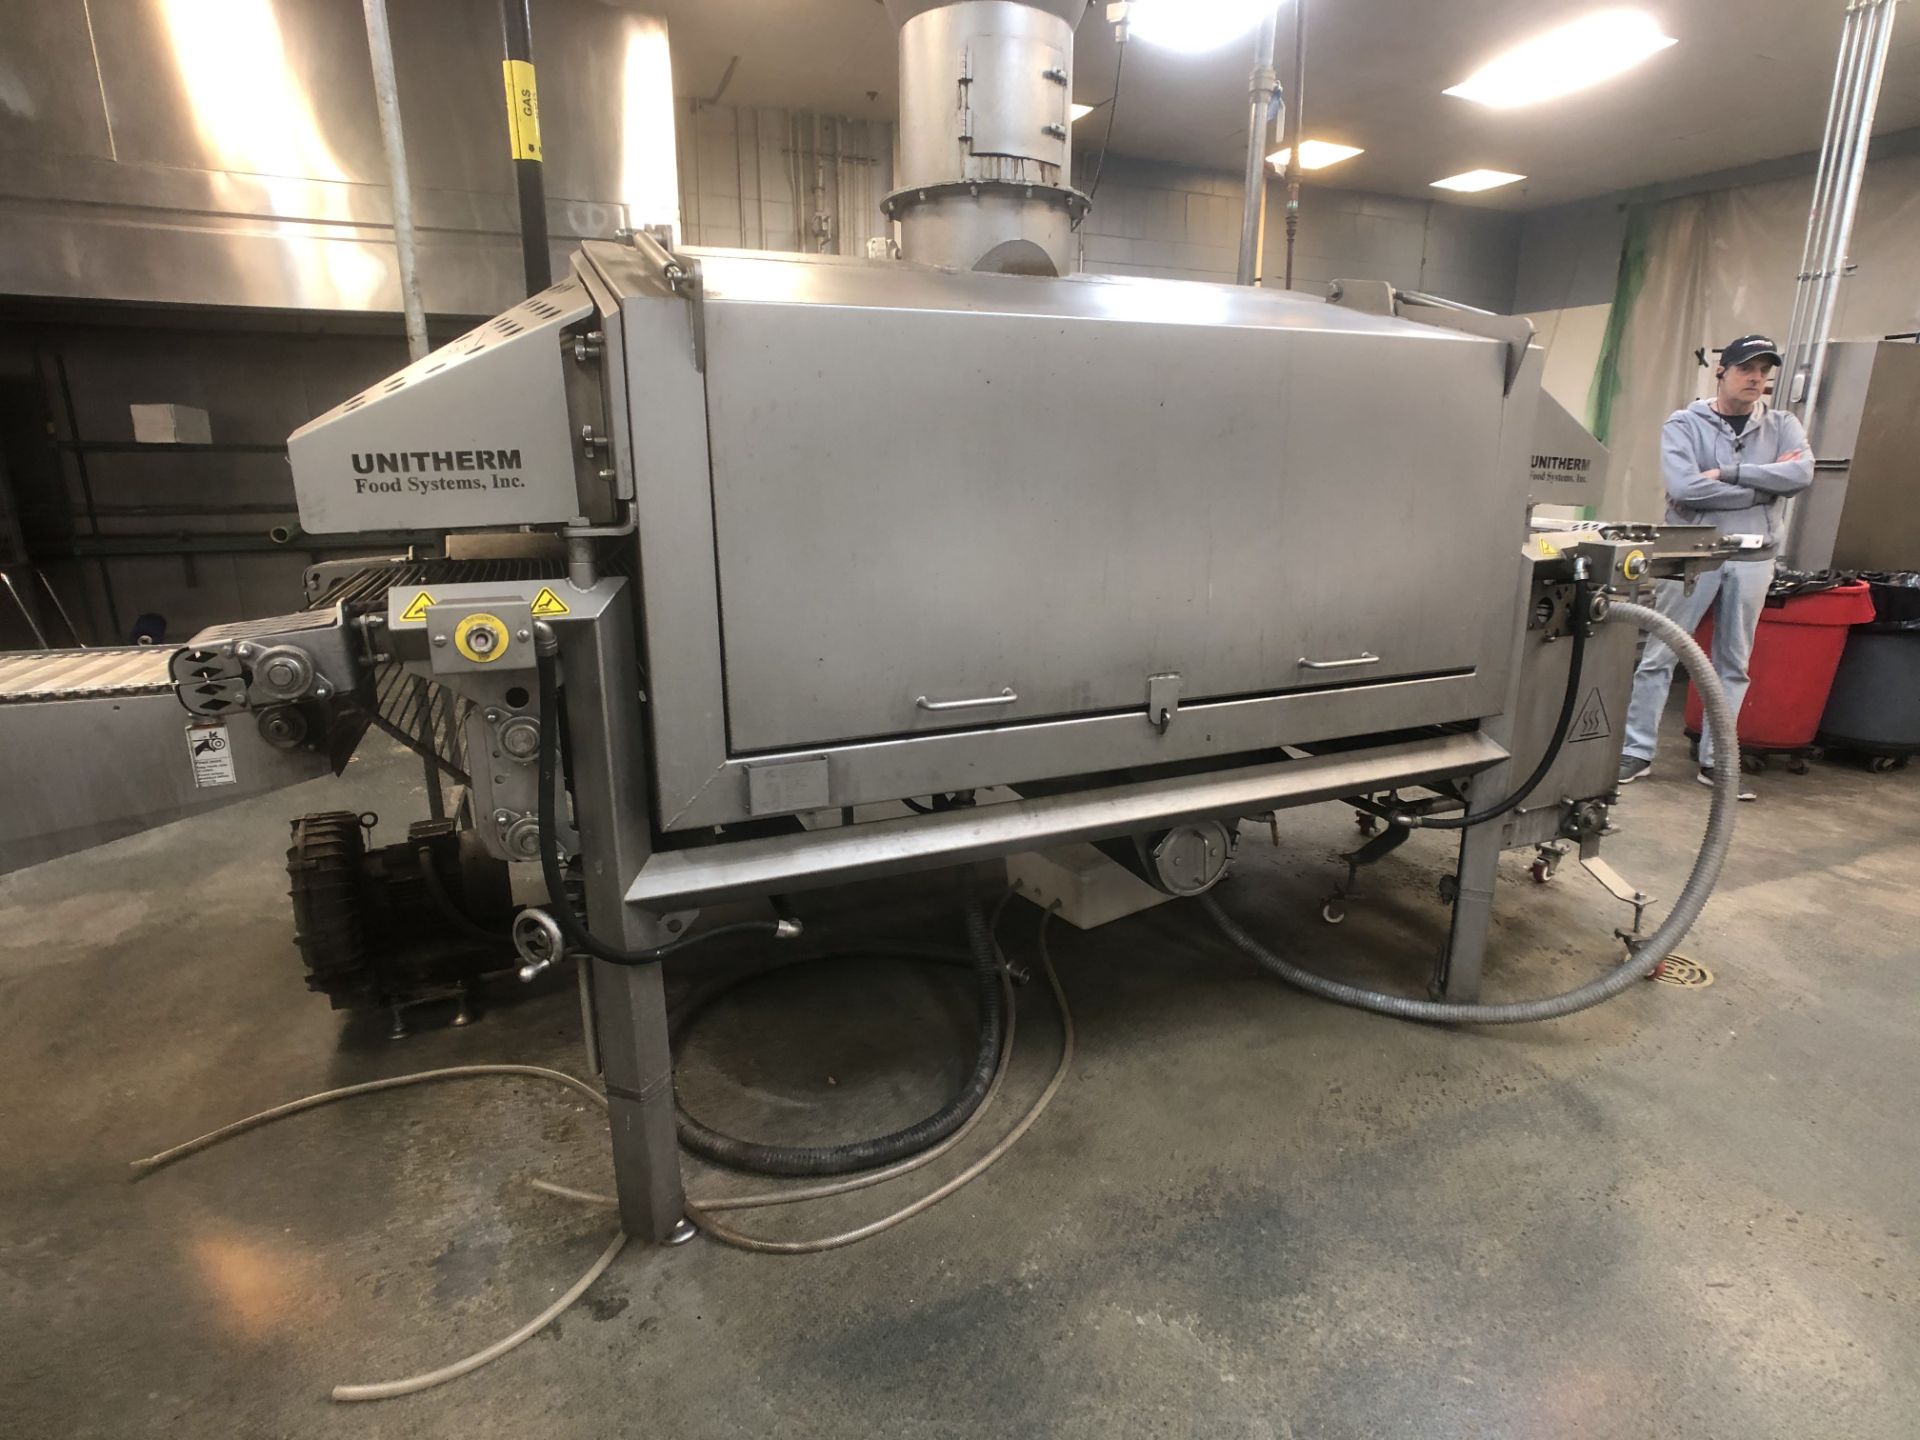 2019 Unitherm Food Systems 24" Flame Grill with Preheat, Model FG-24-8B-P, S/N FLGR-2485, Includes - Image 8 of 19